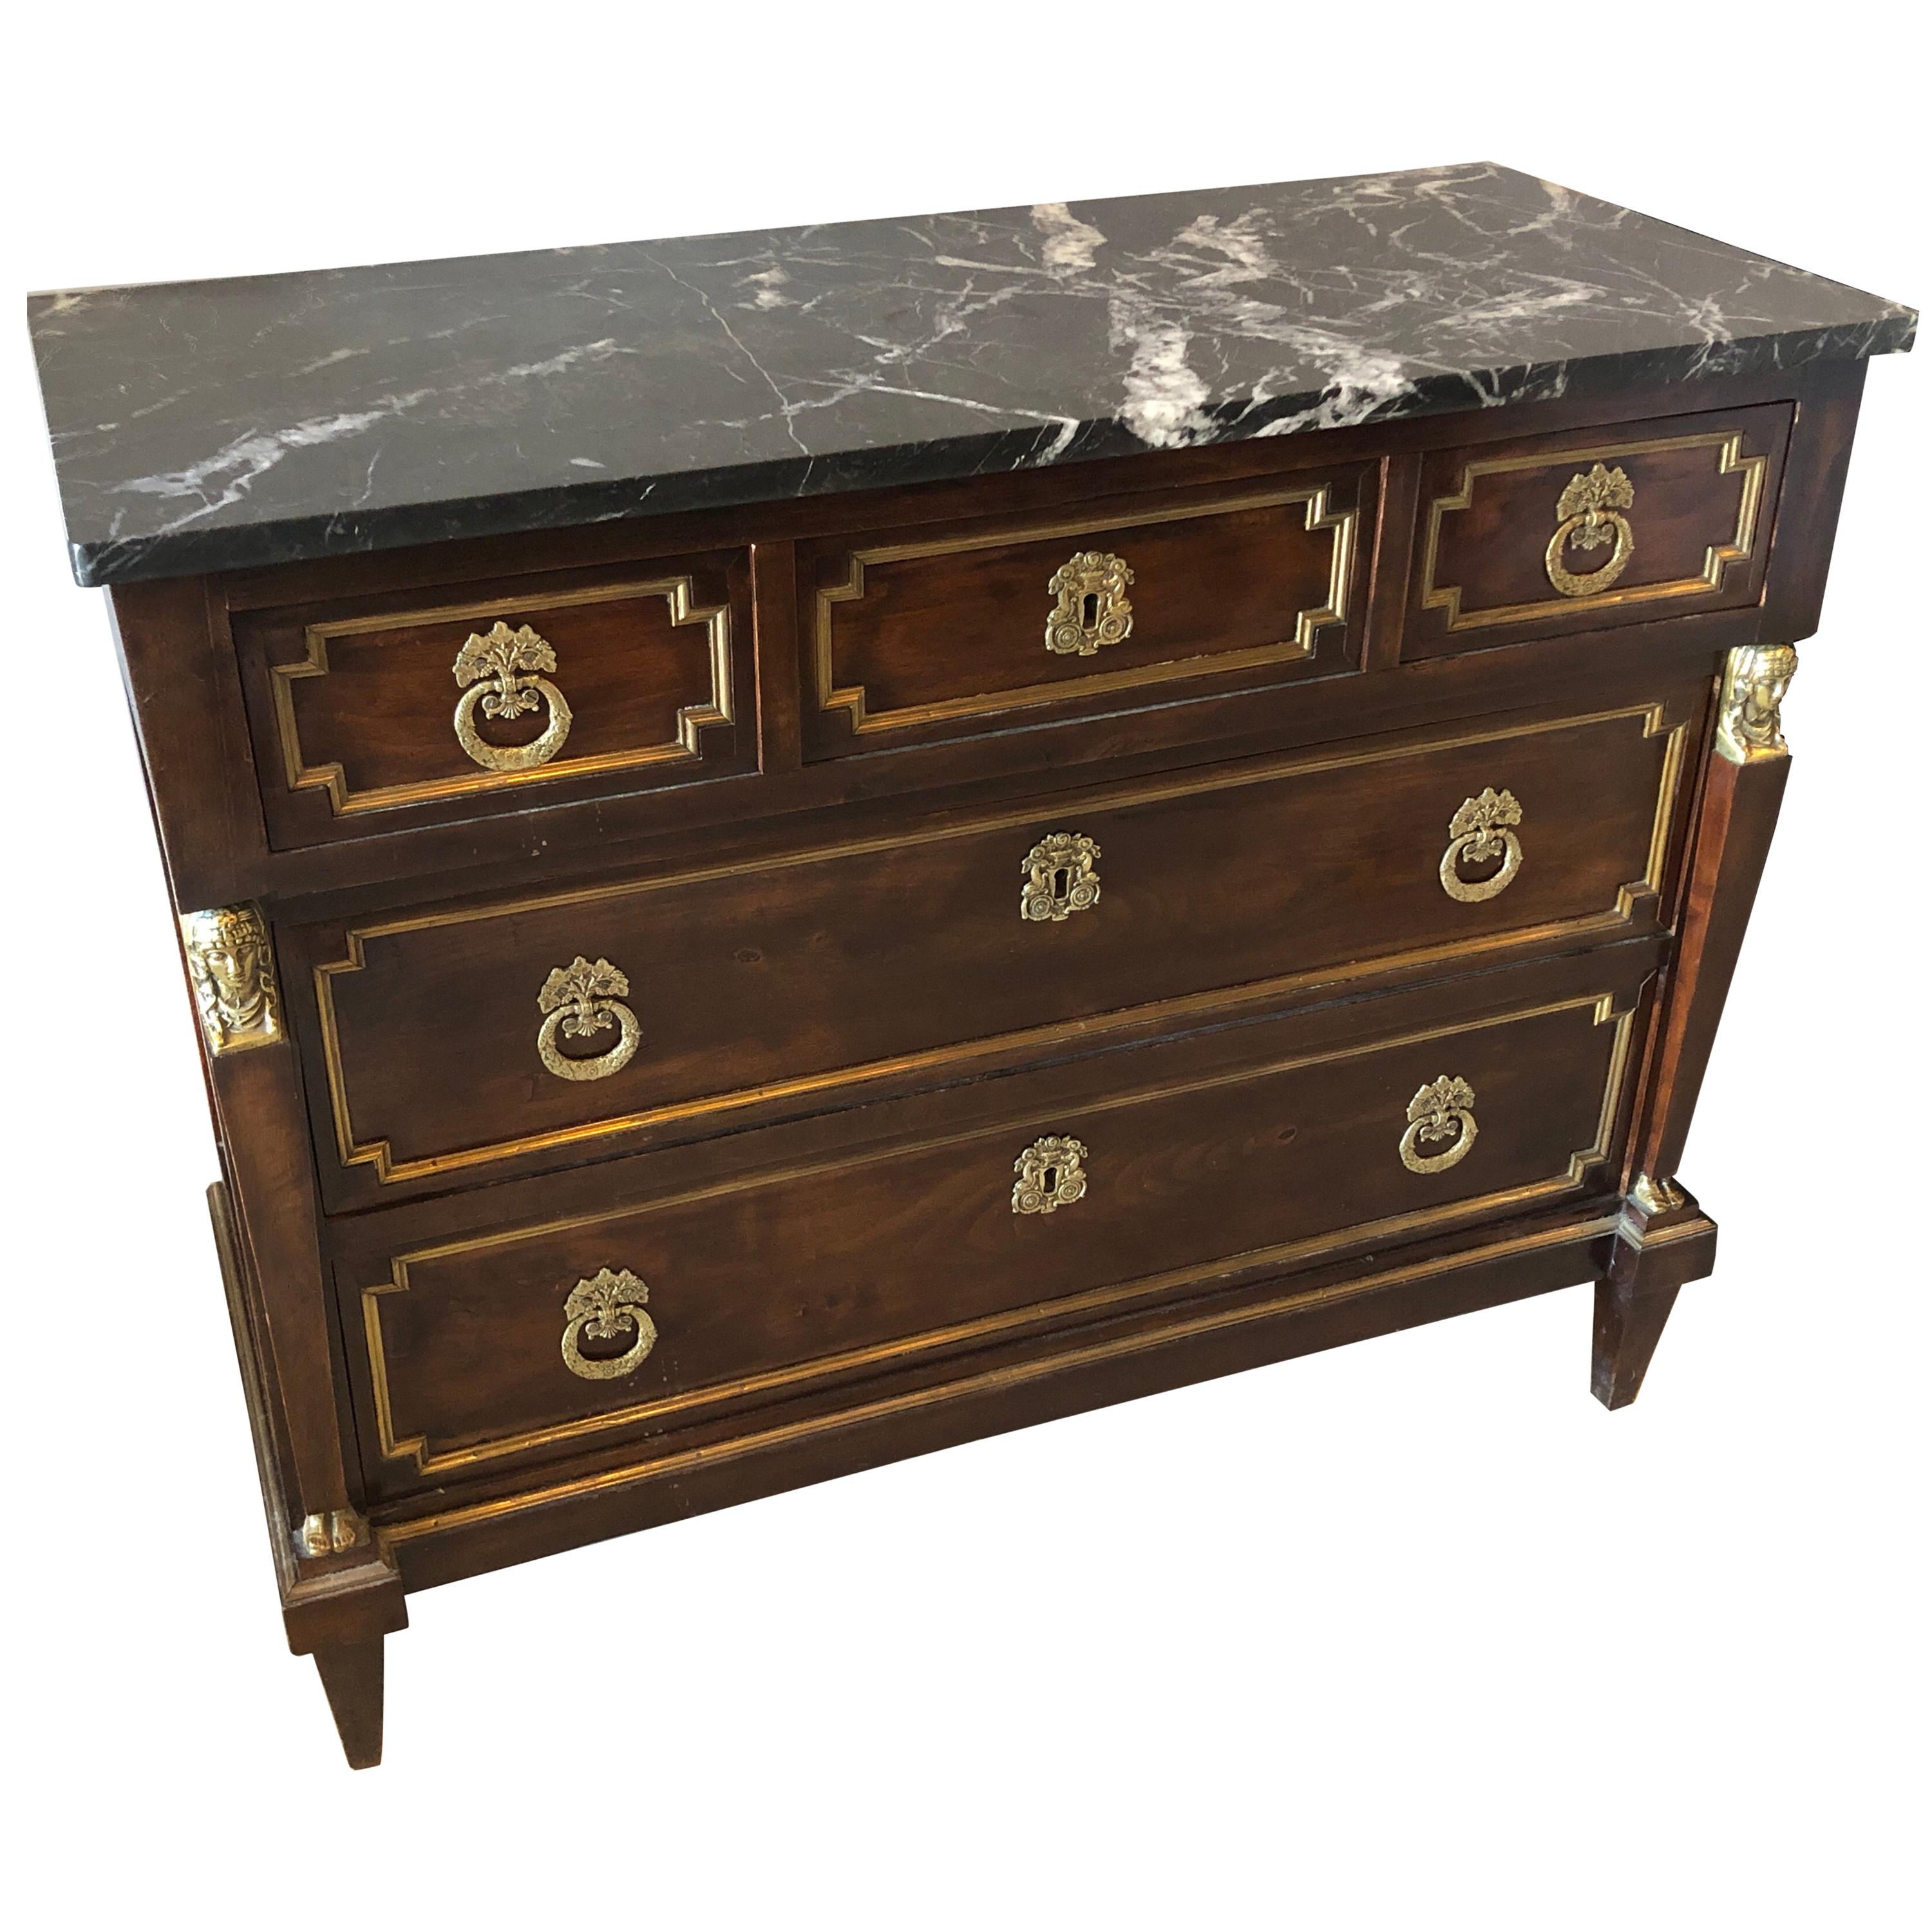 19th Century Empire Style Commode or Nightstand